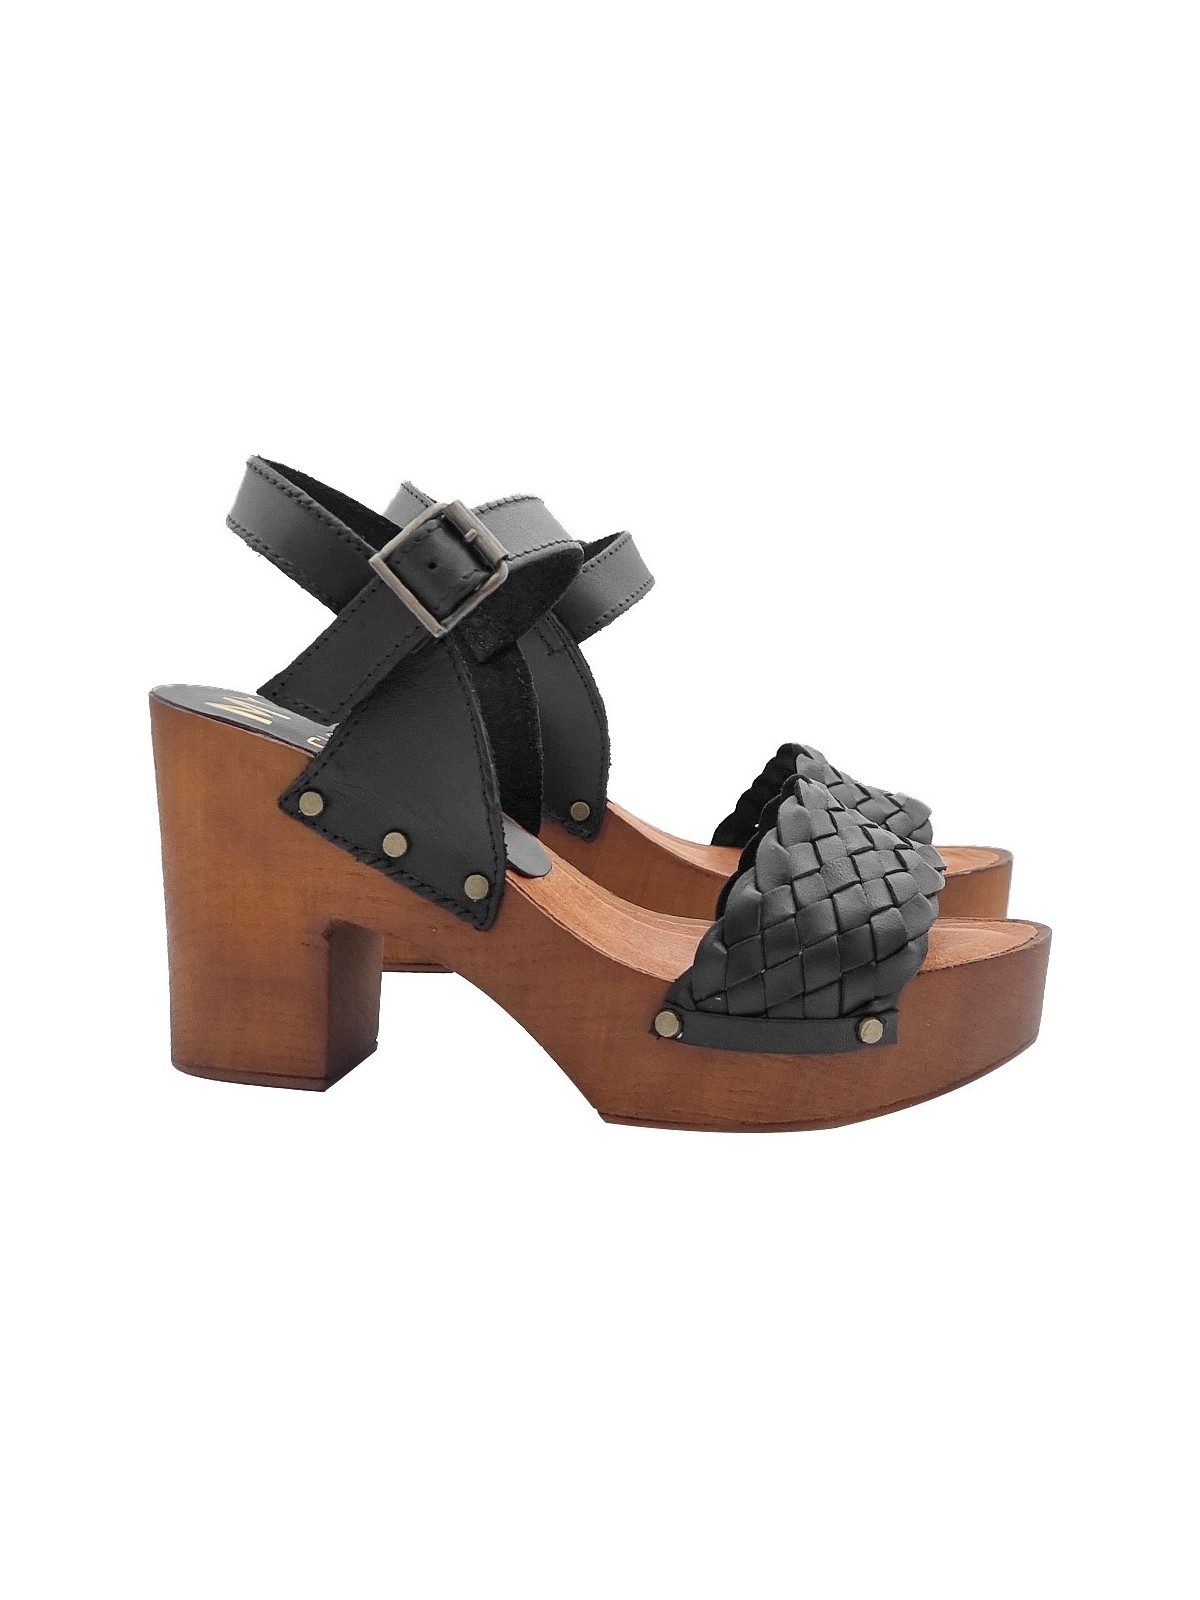 BLACK SANDALS WITH WOVEN BAND AND HEEL 9